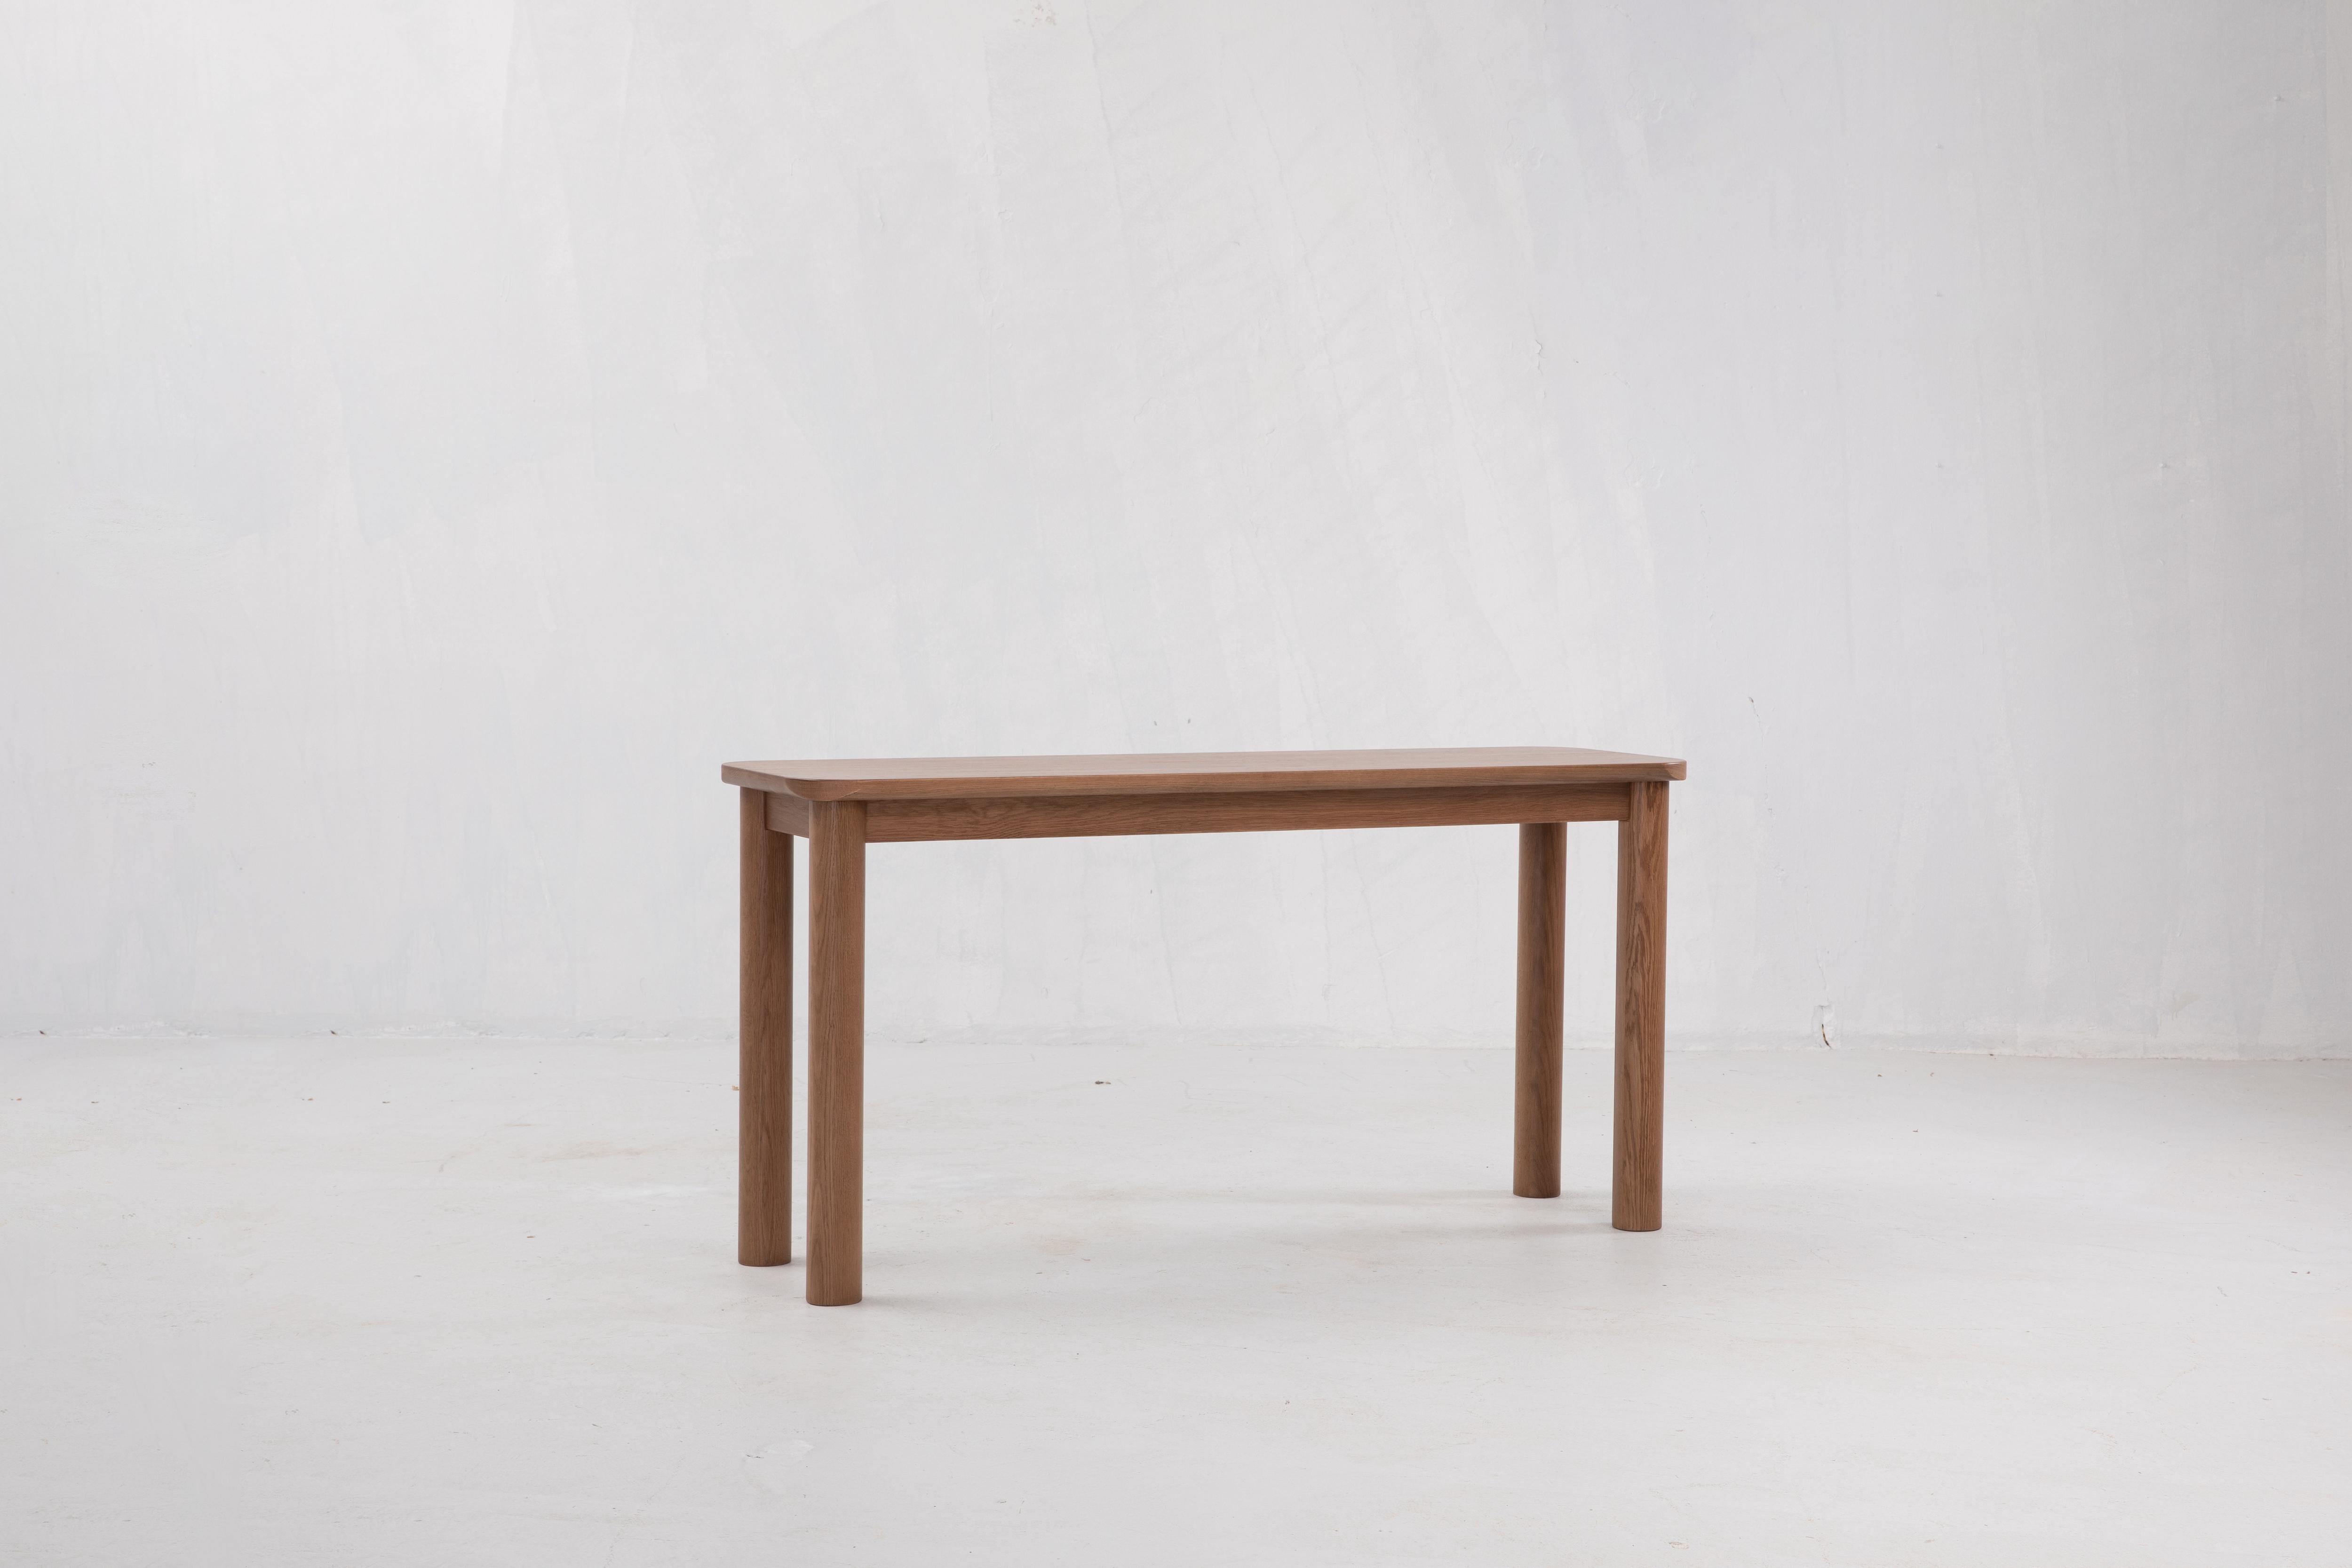 Sun at Six is a contemporary furniture design studio that works with traditional Chinese joinery masters to handcraft our pieces using traditional joinery. 

Great furniture begins with quality materials: raw, sustainably sourced white oak, our